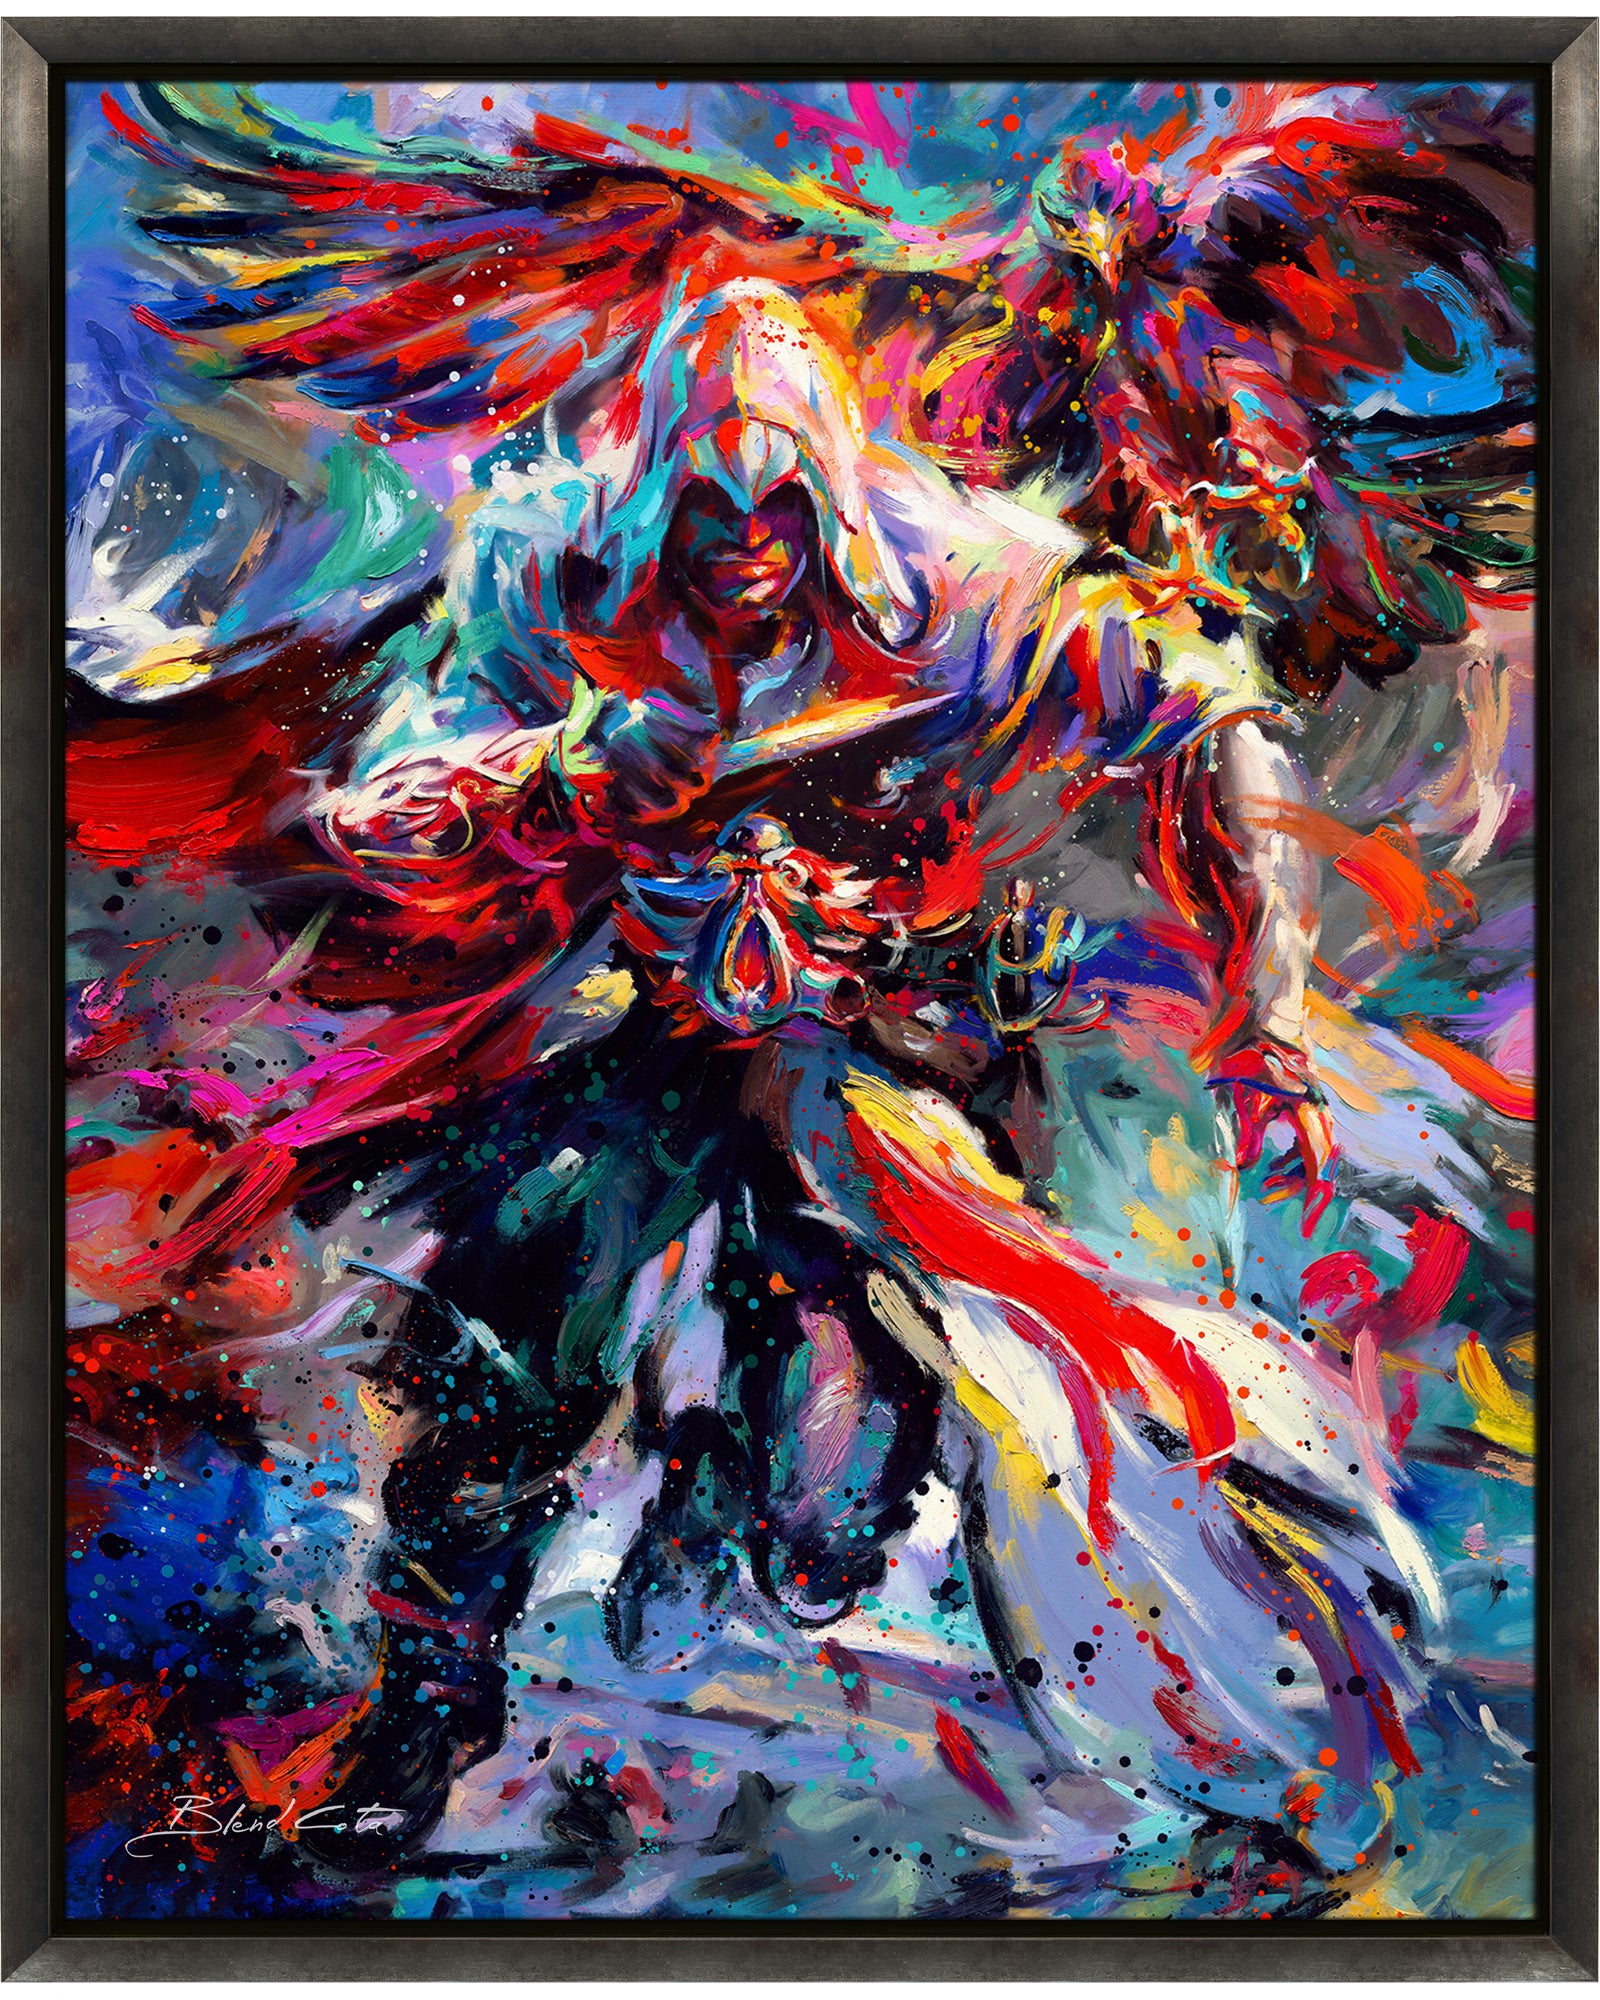 Oil on canvas original painting of Assassin's Creed Ezio Auditore and Eagle bursting forth with energy and painted with colorful brushstrokes in an expressionistic style.